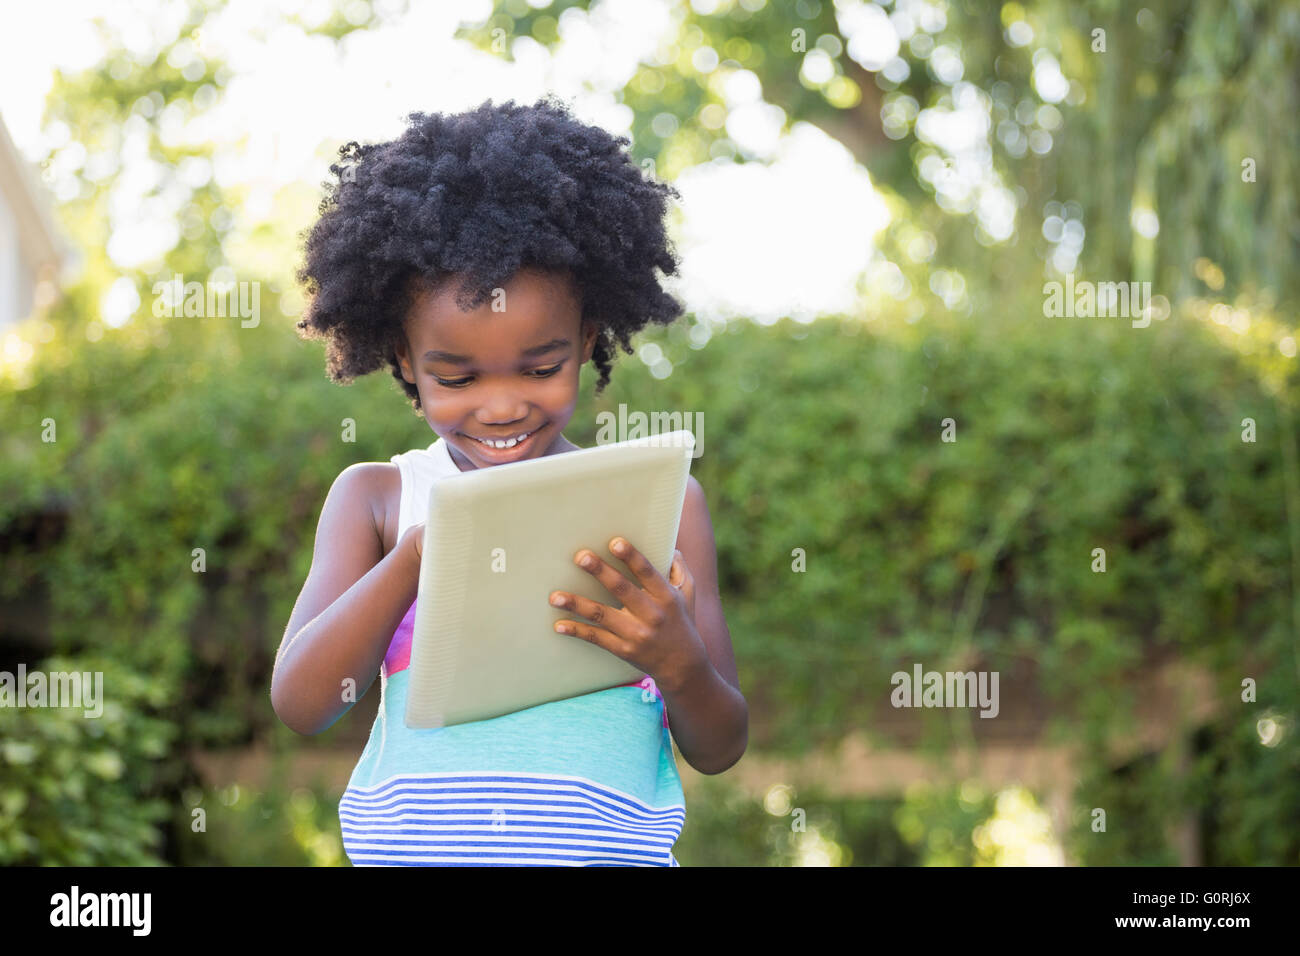 Cute boy smiling and using a tablet Stock Photo